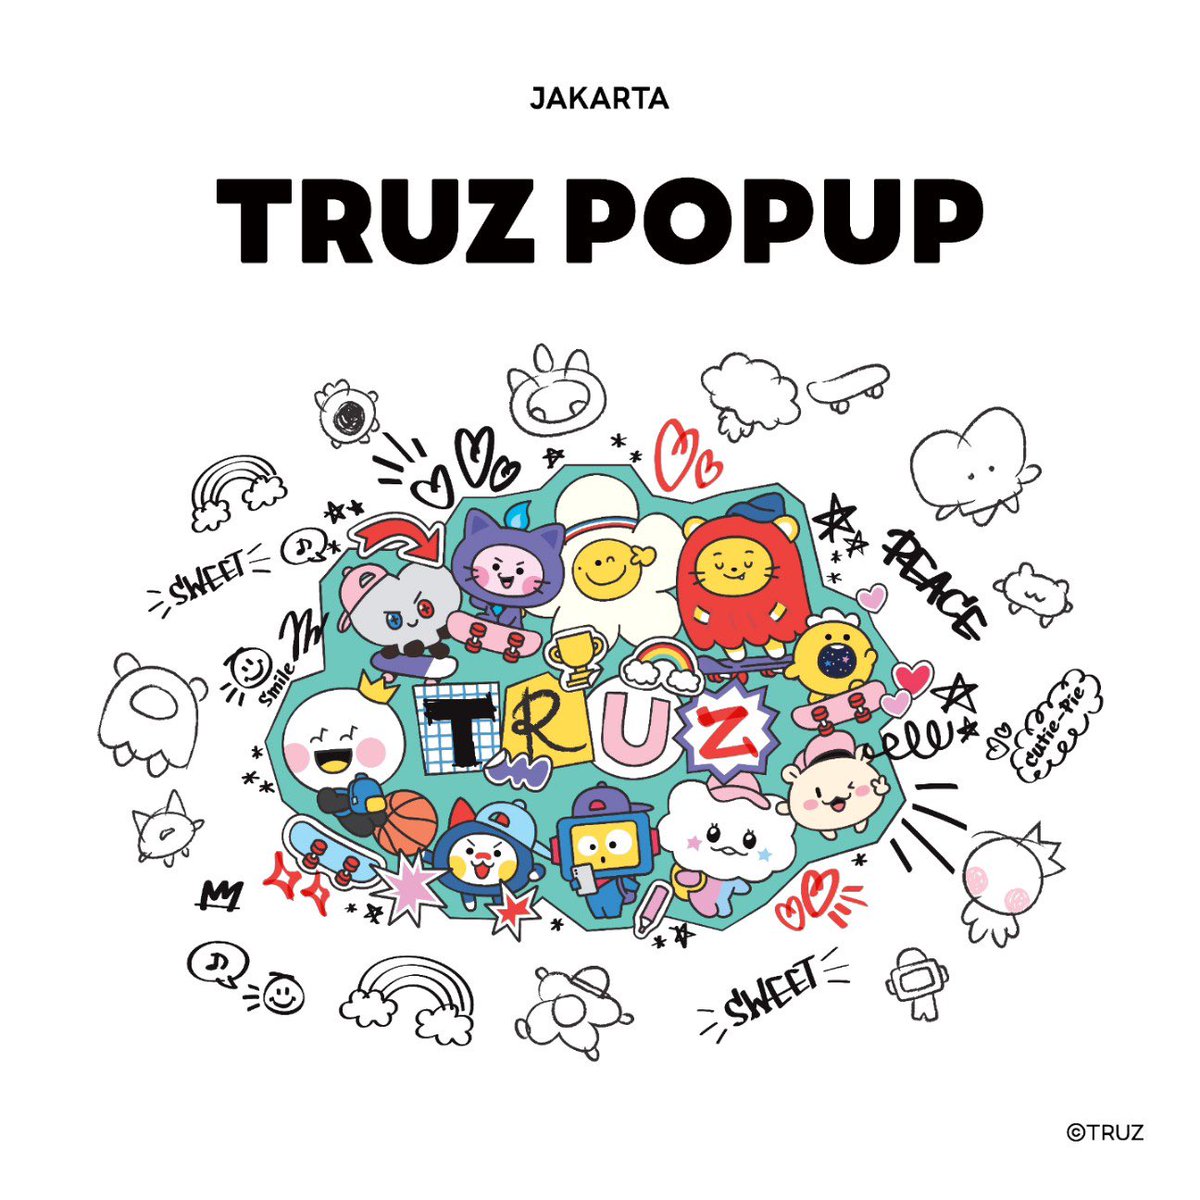 🌟 Super News! 🌟

Get ready, Jakarta! We're thrilled to announce the opening of the  TREASURE & TRUZ pop-up in Jakarta!!  🎉✨

📅 Date: June 4th - 16th
📍 Location: Kota Kasablanka

Join us for an unforgettable experience filled with amazing merchandise!  Don’t miss your chance